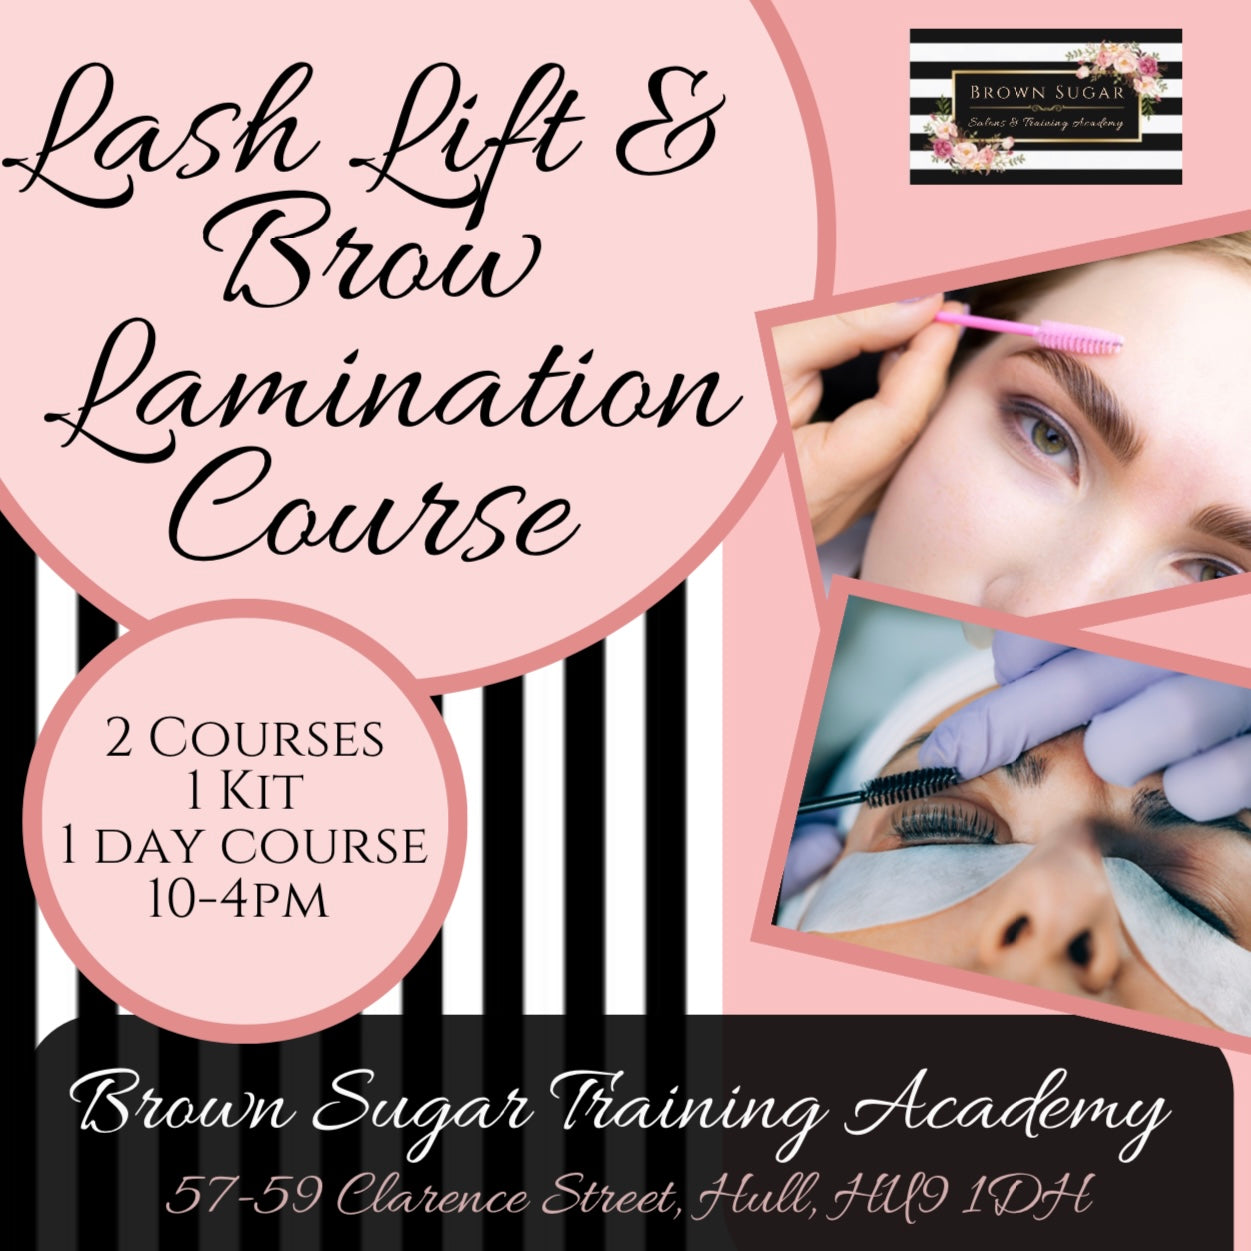 Brow Lamination & Lash Lift Course - Kit Included